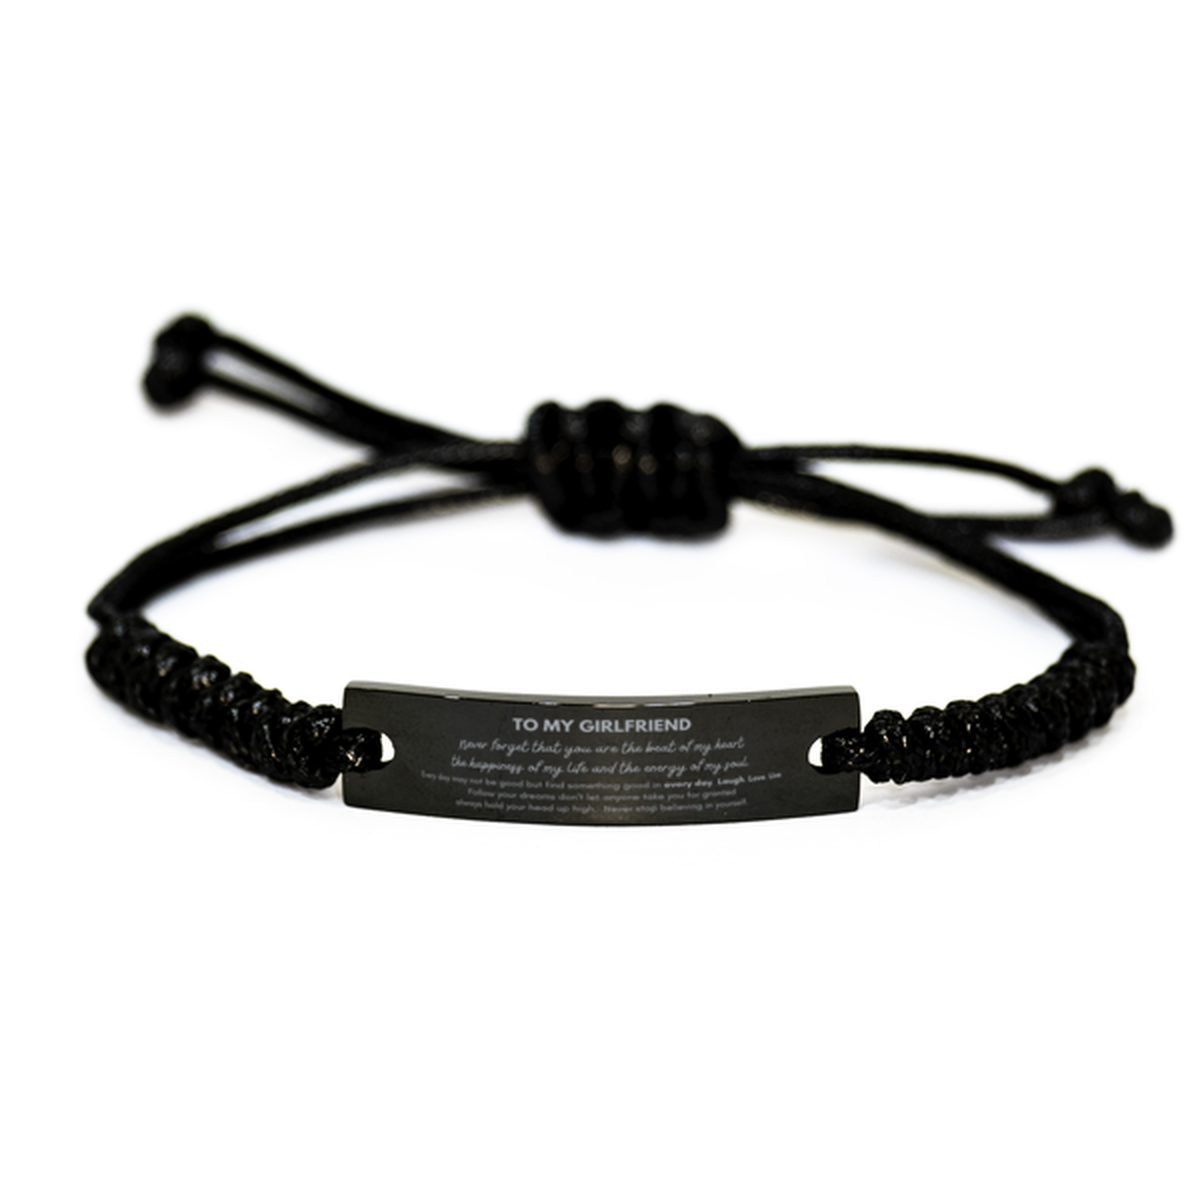 To My Girlfriend Bracelet Gifts, Christmas Girlfriend Black Rope Bracelet Present, Birthday Unique Motivational For Girlfriend, To My Girlfriend Never forget that you are the beat of my heart the happiness of my life and the energy of my soul